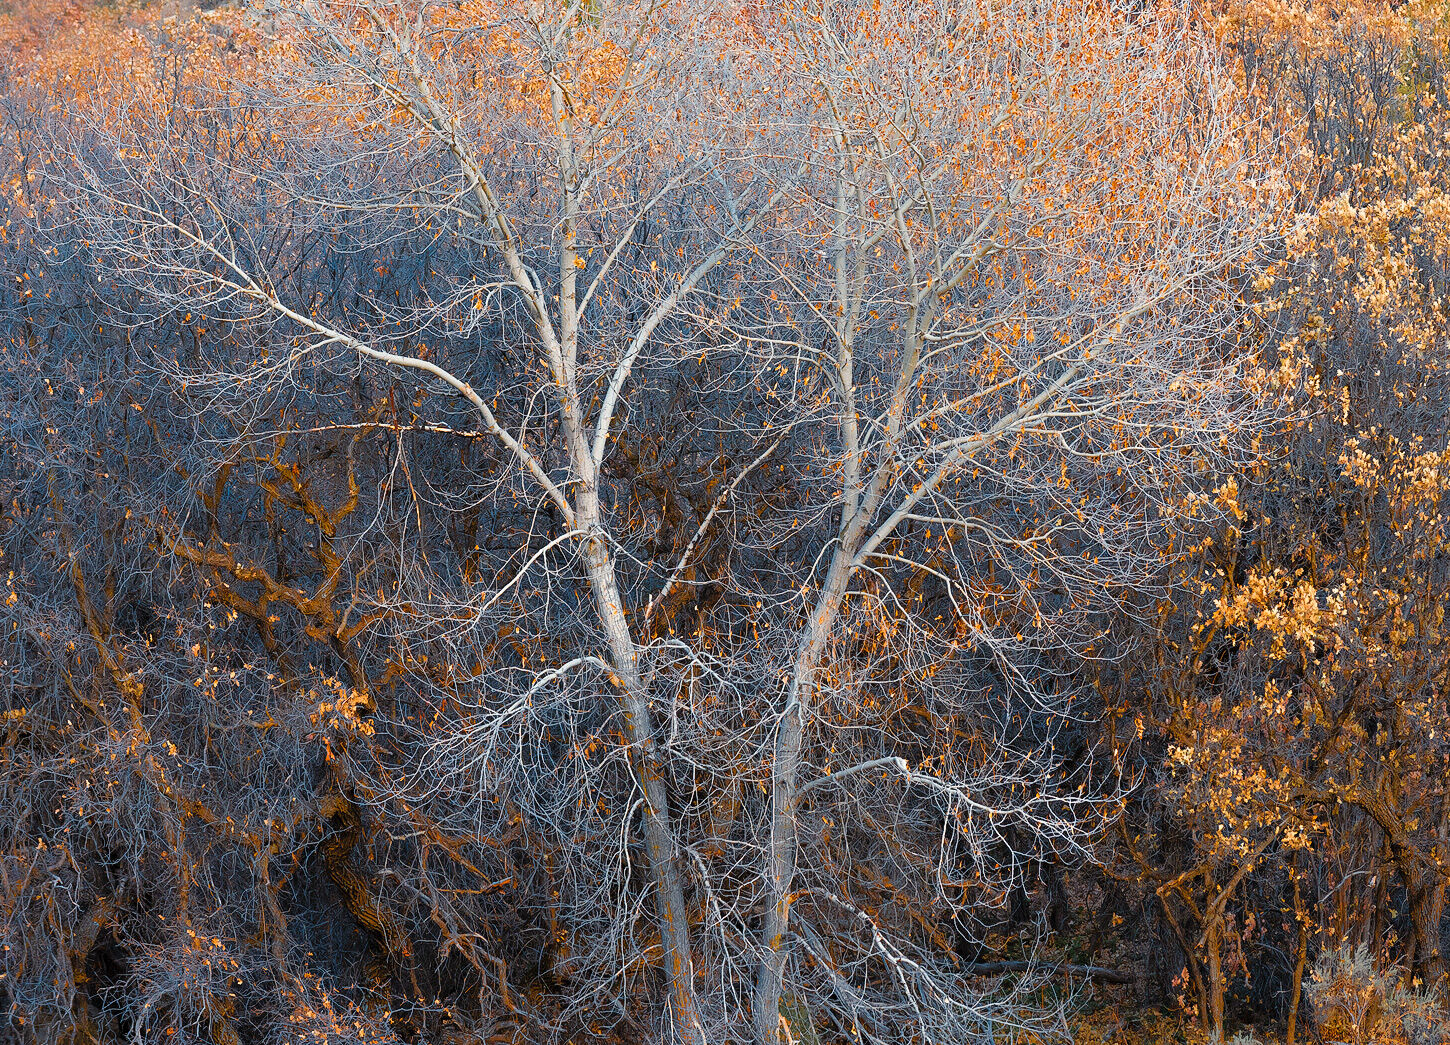 The top of a cottonwood tree is seen with few leaves and creates an abstract image of branches.